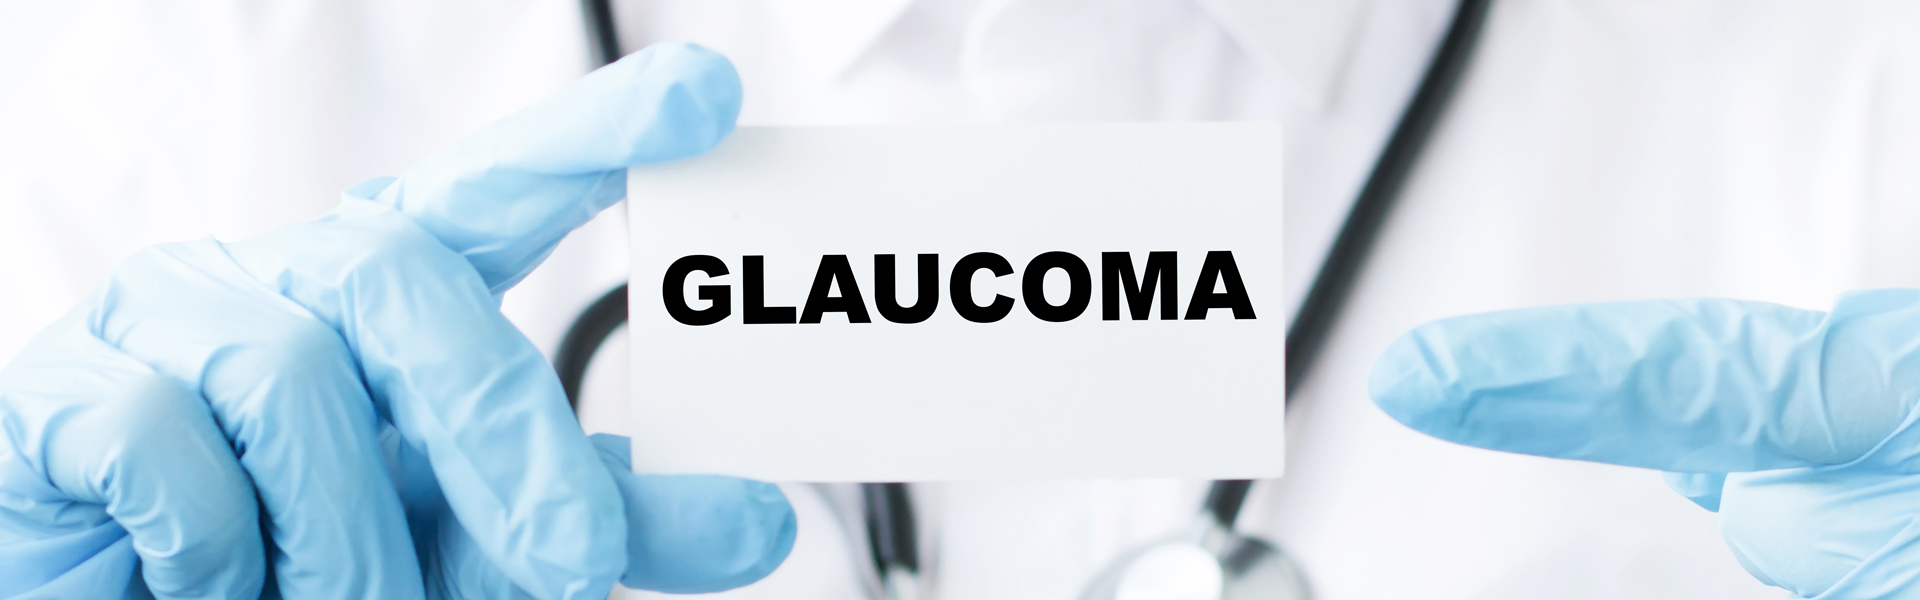 Glaucoma Surgery Aftercare Tips | Lifestyle & Diet Care